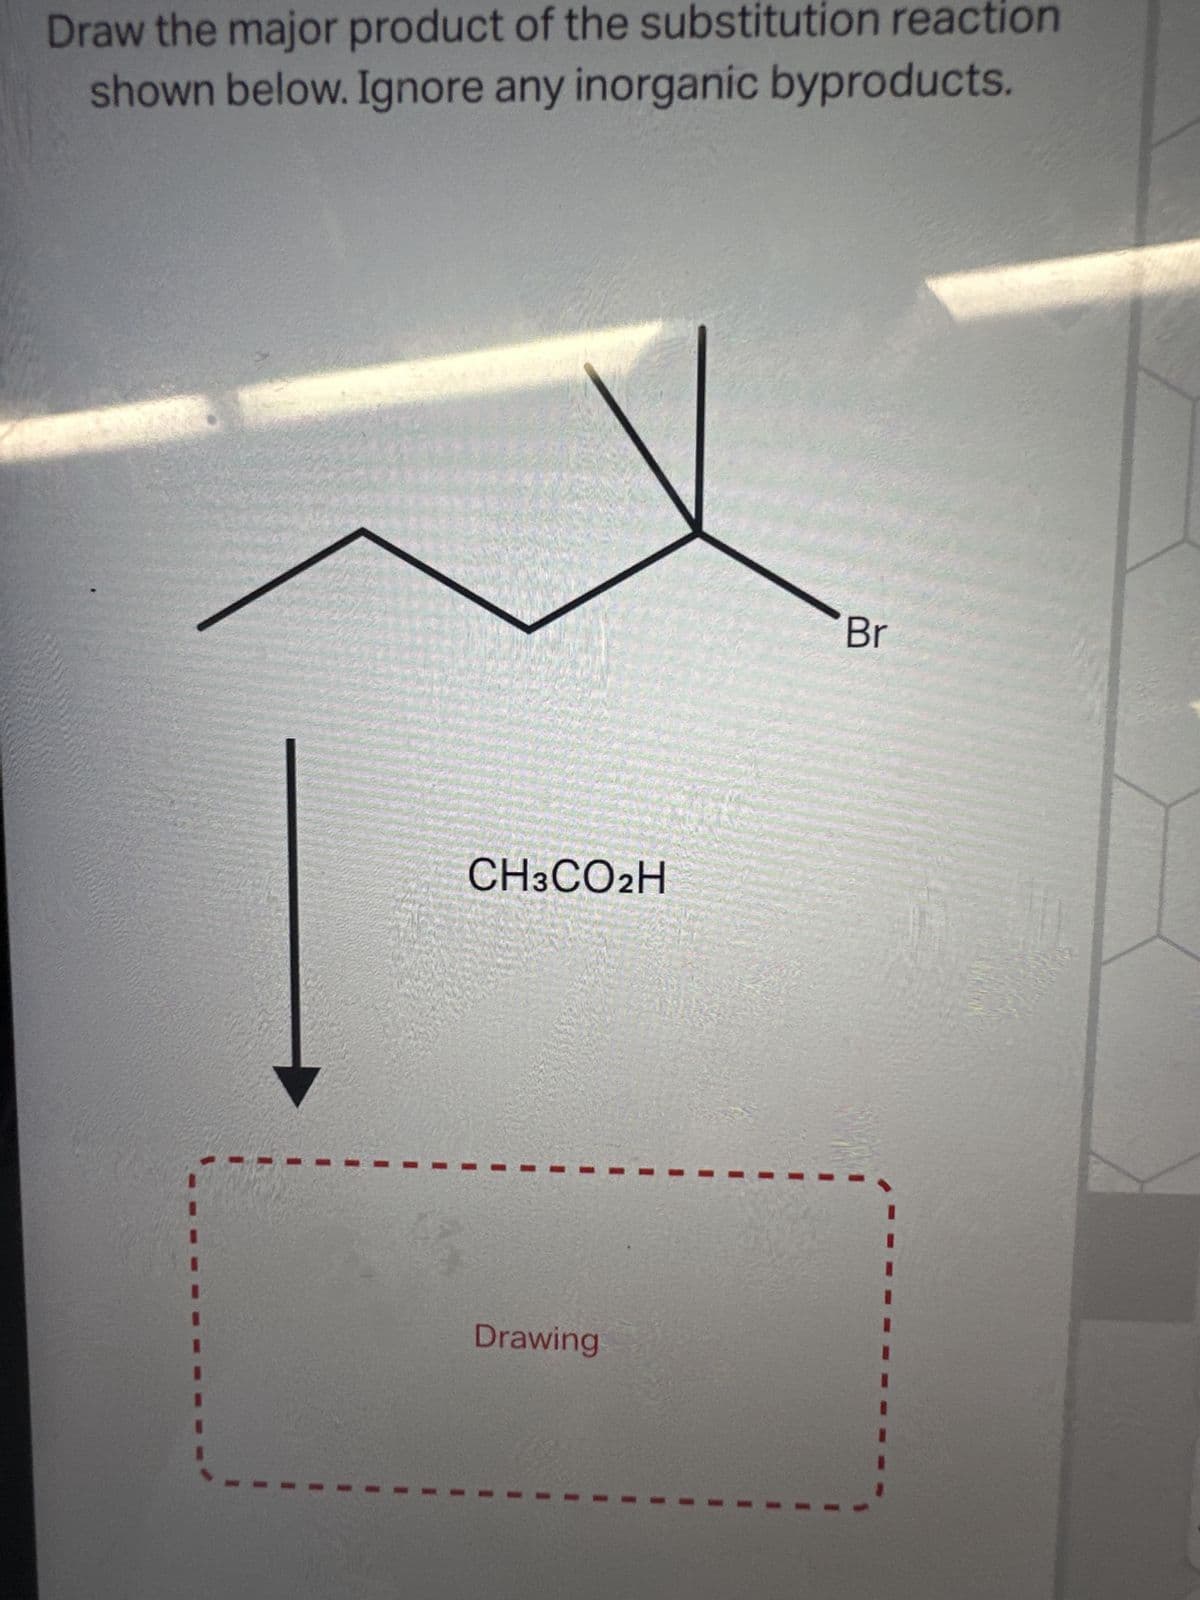 Draw the major product of the substitution reaction
shown below. Ignore any inorganic byproducts.
CH3CO2H
Drawing
Br